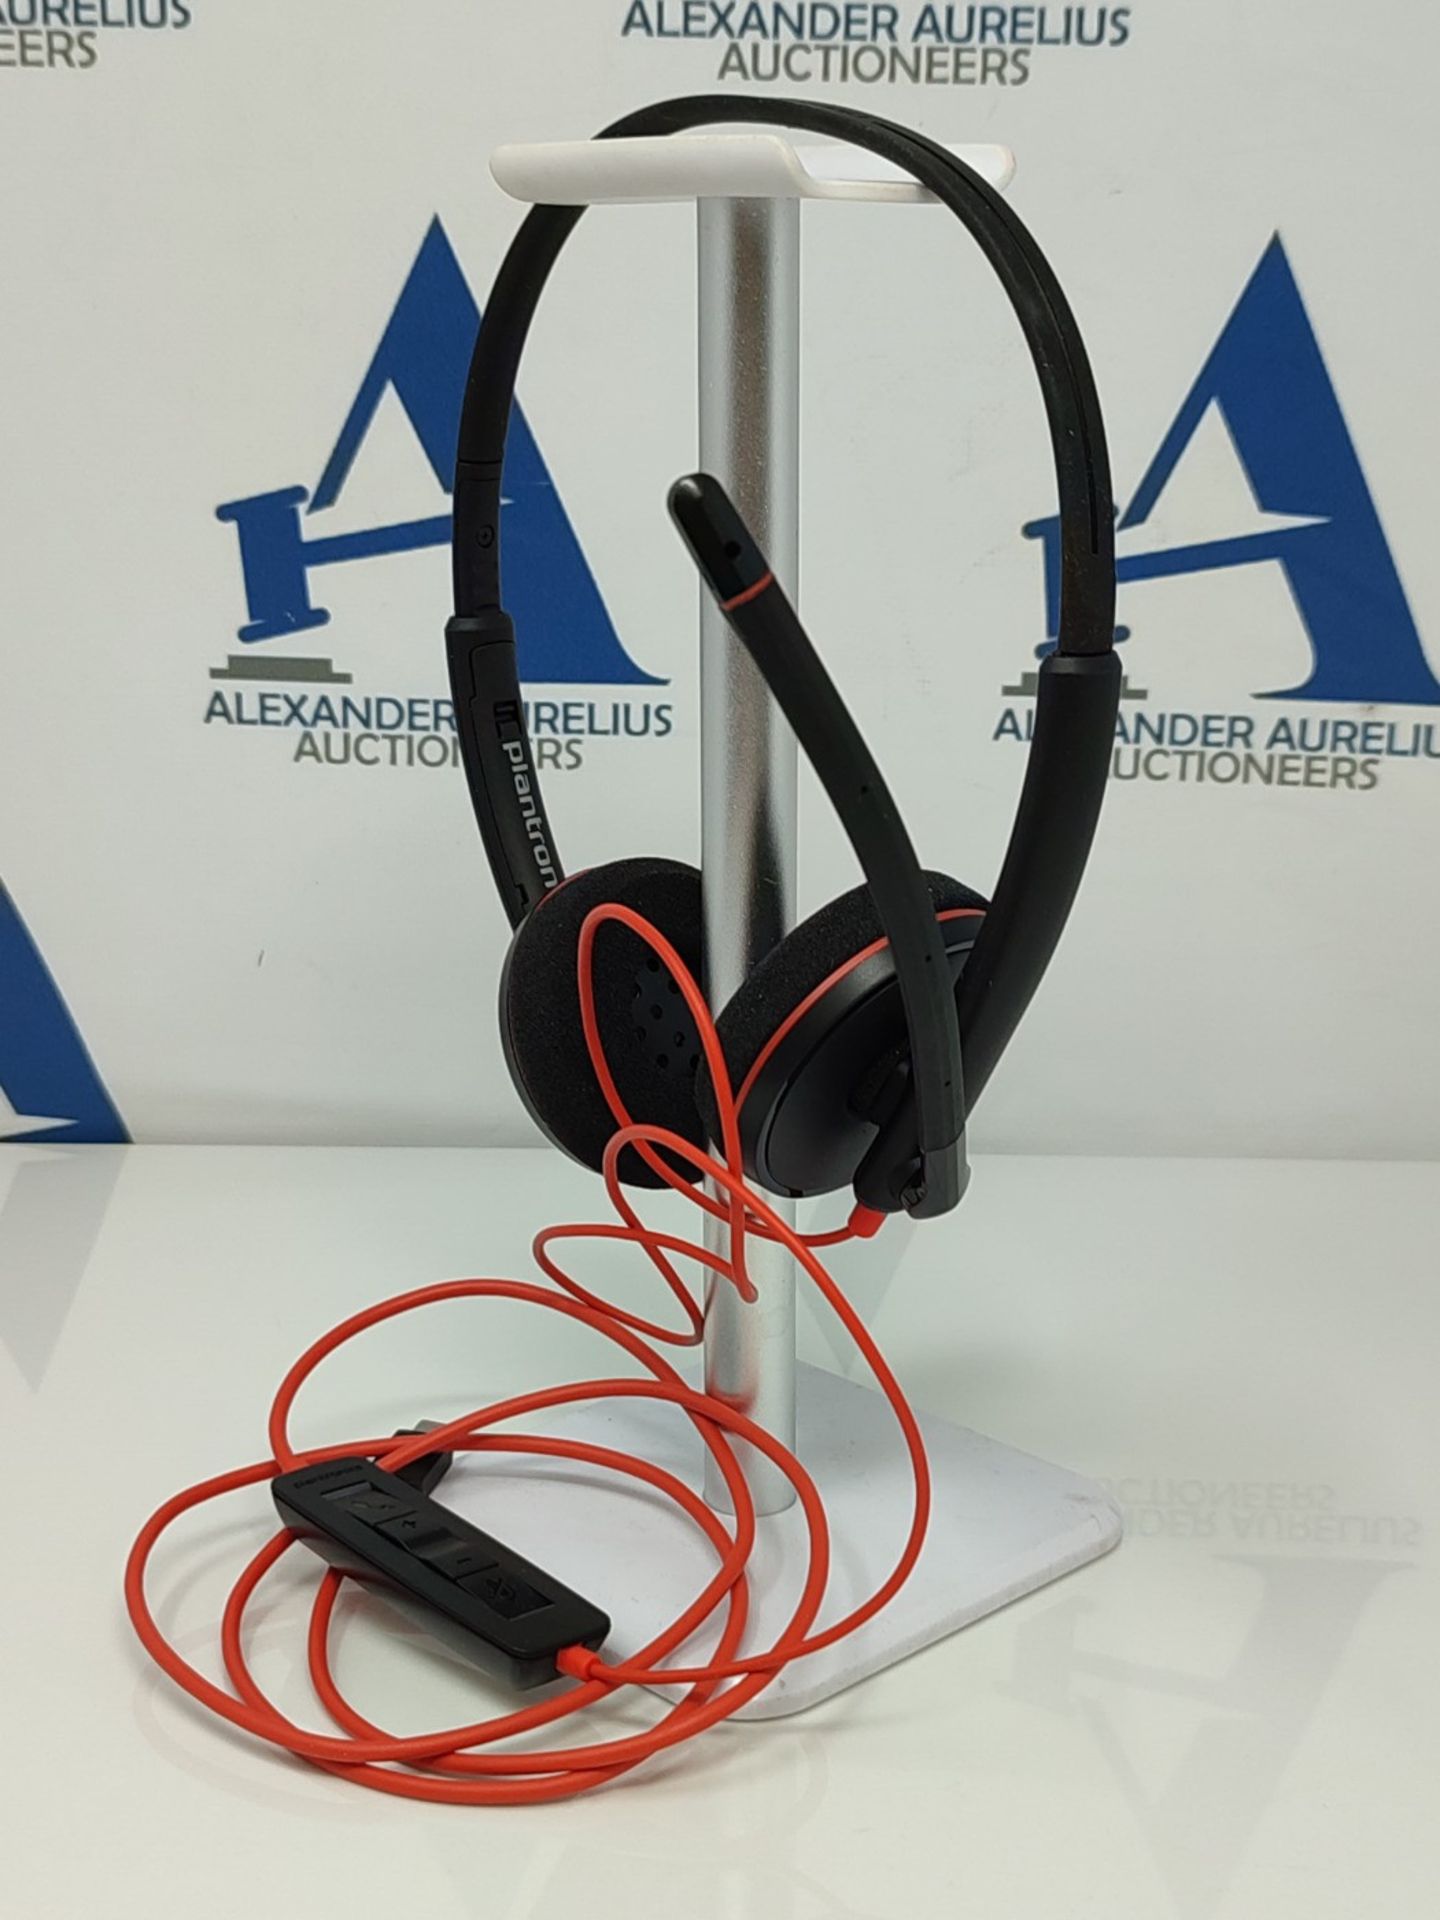 Plantronics - Blackwire 3220 - Wired Dual-Ear (Stereo) Headset with Boom Mic - USB-C t - Image 2 of 2